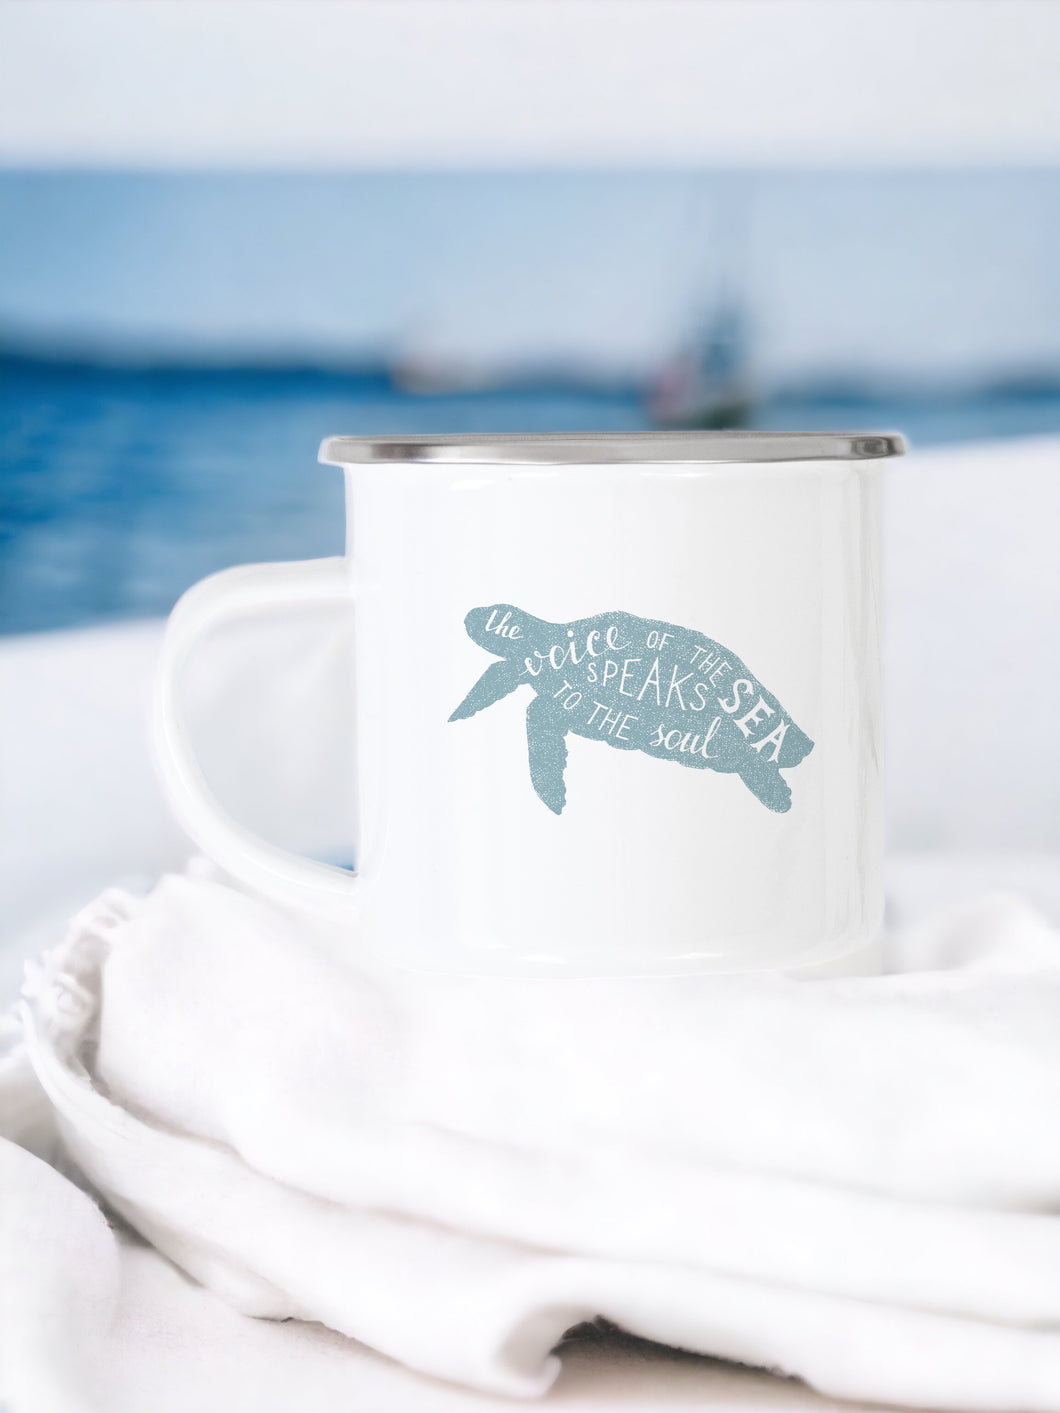 The Voice of the Sea Speaks to the Soul - Enamel Mug